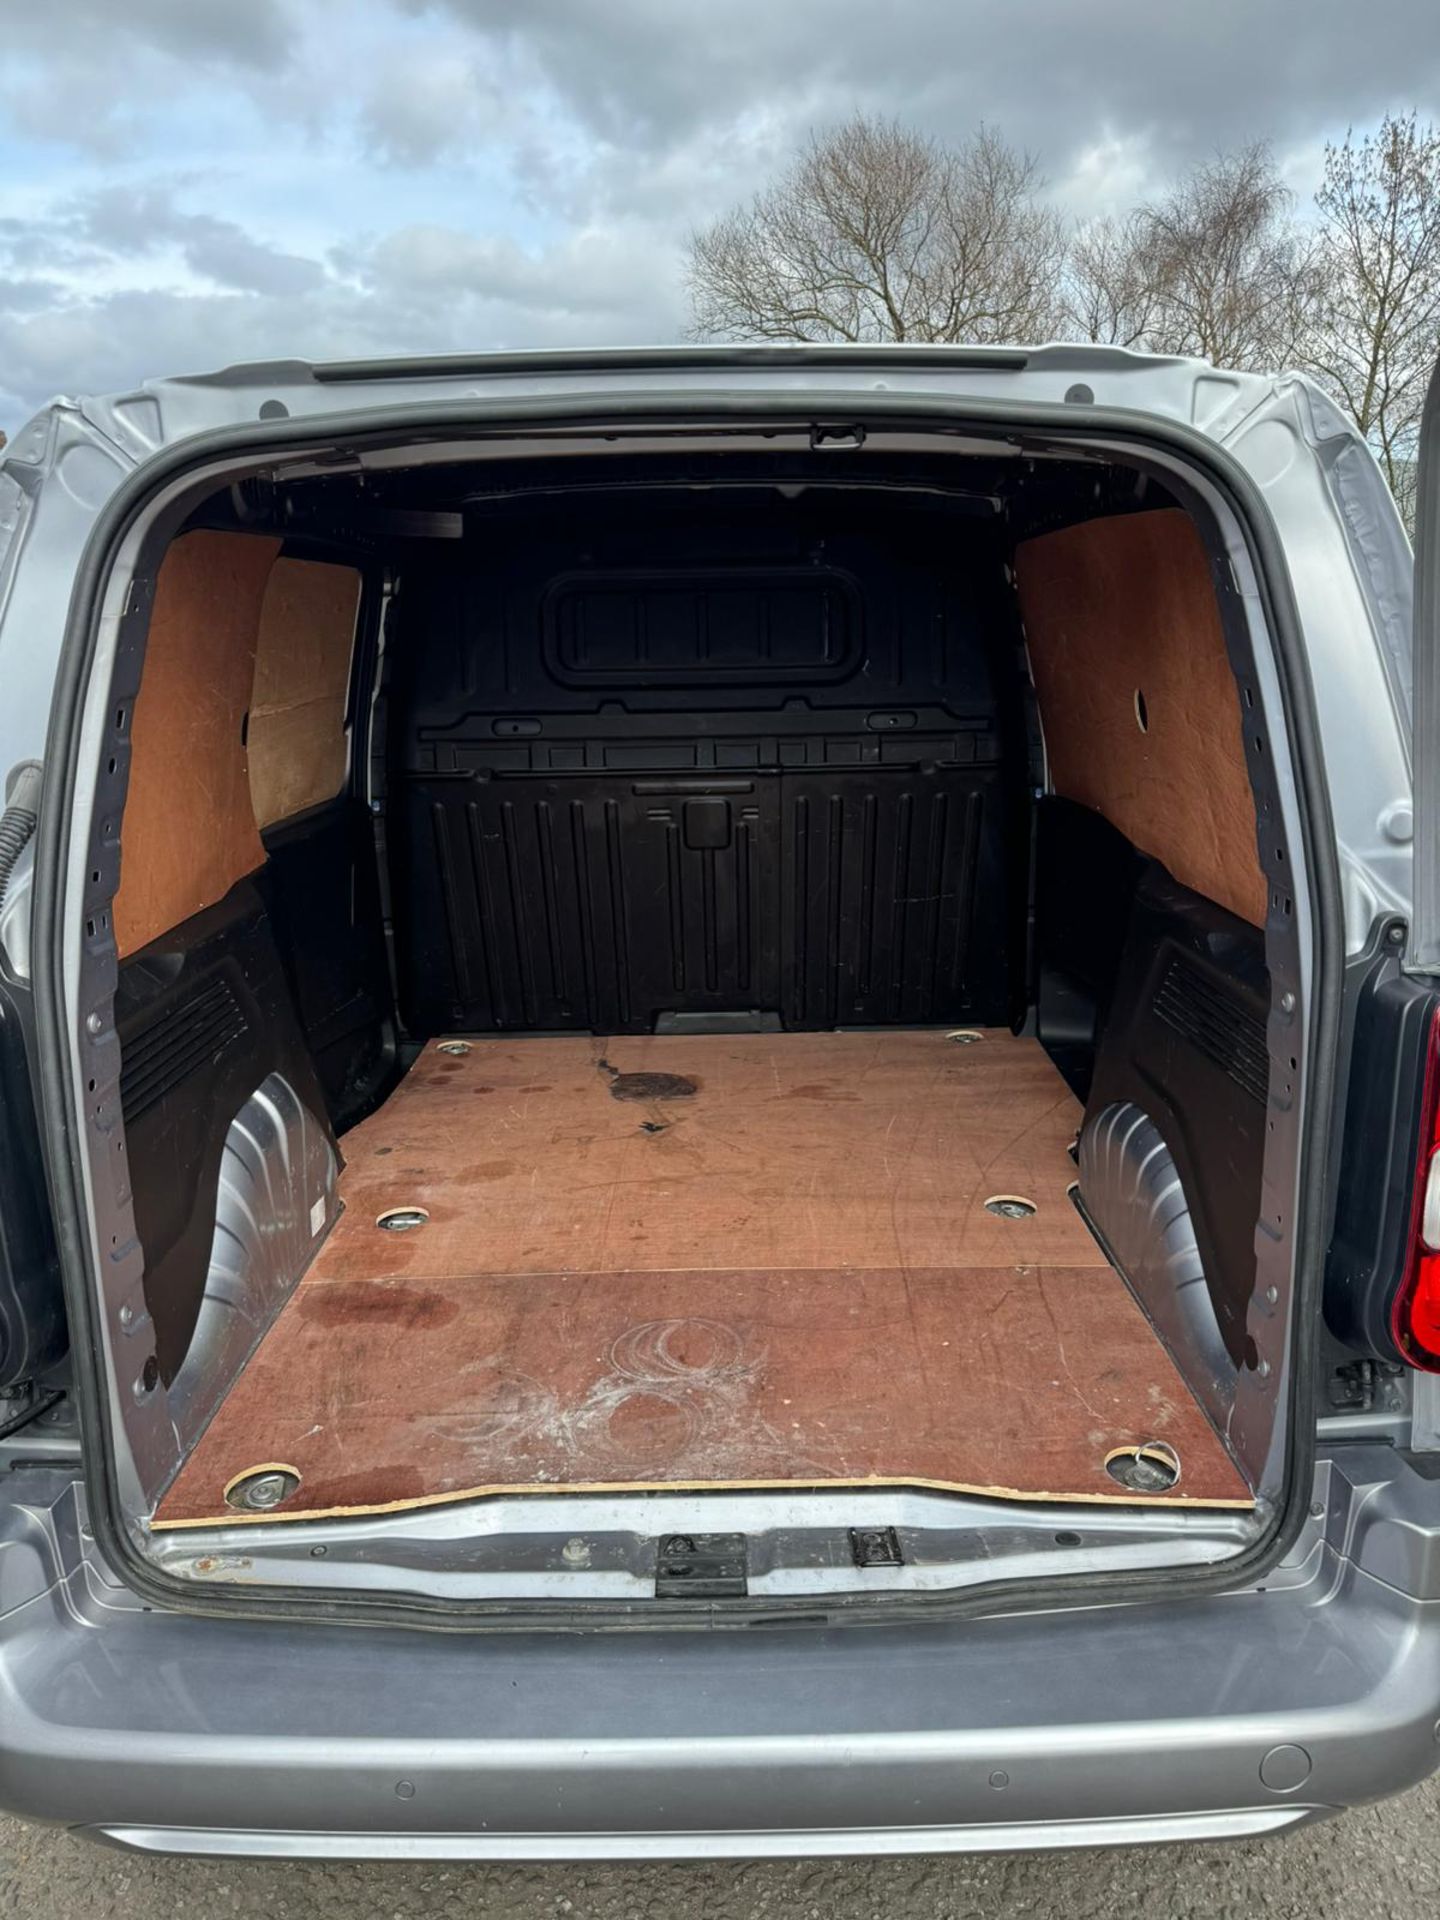 2020 20 VAUXHALL COMBO SPORTIVE PANEL VAN - 51K MILES - PLY LINED - AIR CON. - Image 10 of 11